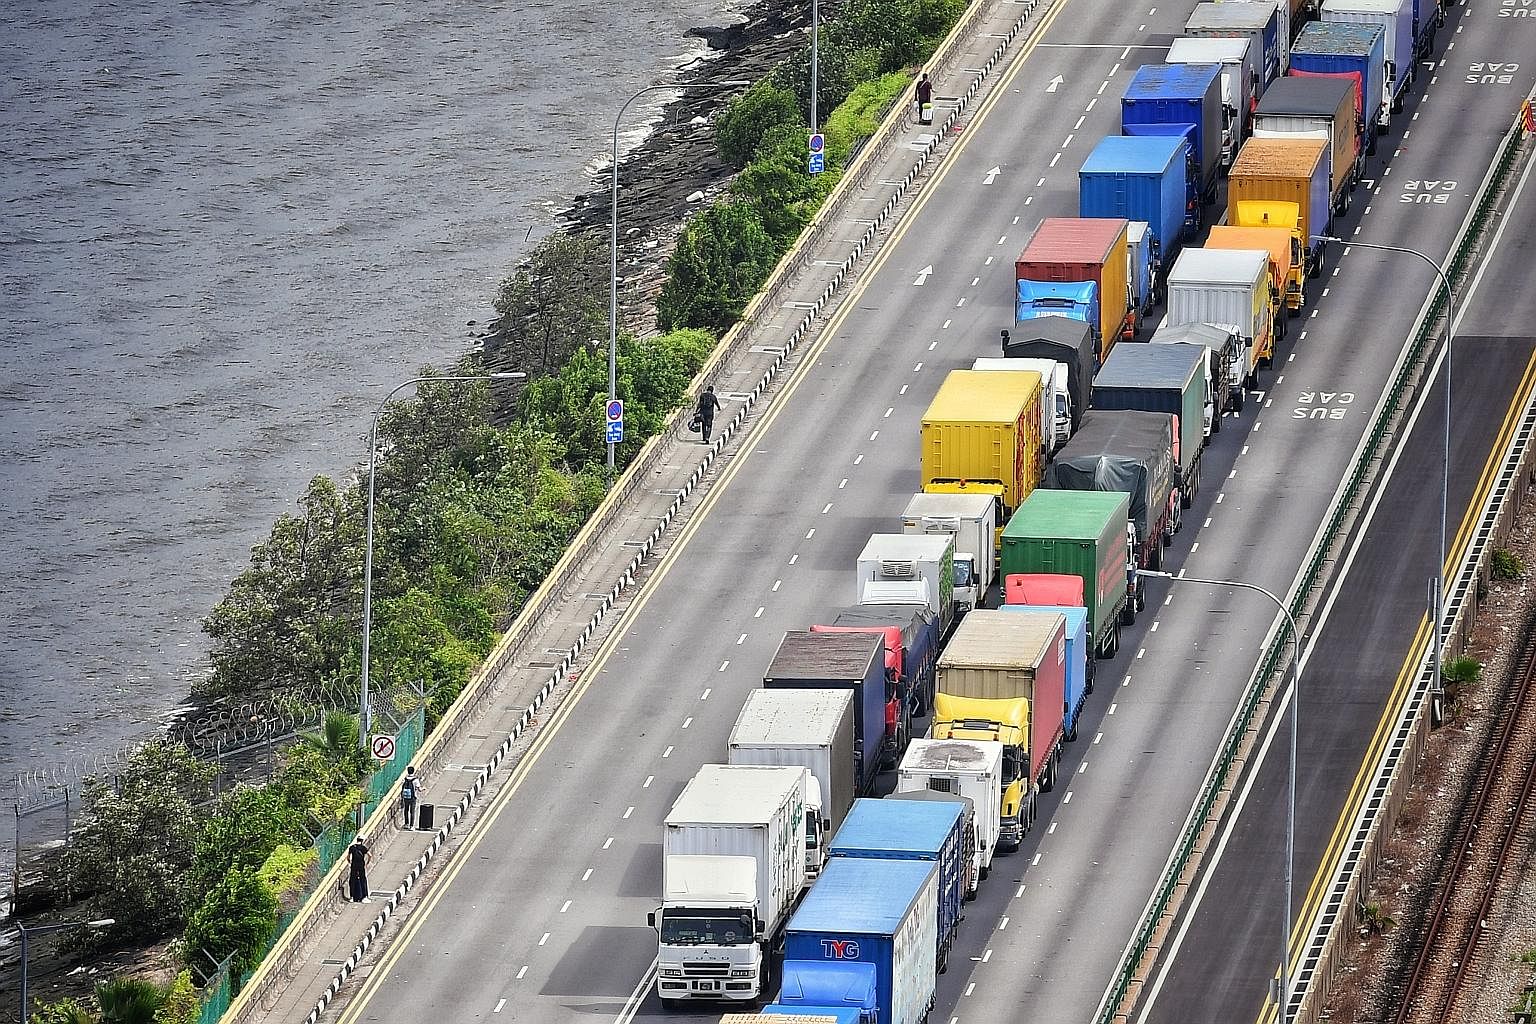 Malaysian workers walking across the Causeway towards Johor with their luggage yesterday morning, passing by trucks carrying goods into Singapore. Johor health and environment committee chairman R. Vidyananthan said that effective yesterday, up to 40